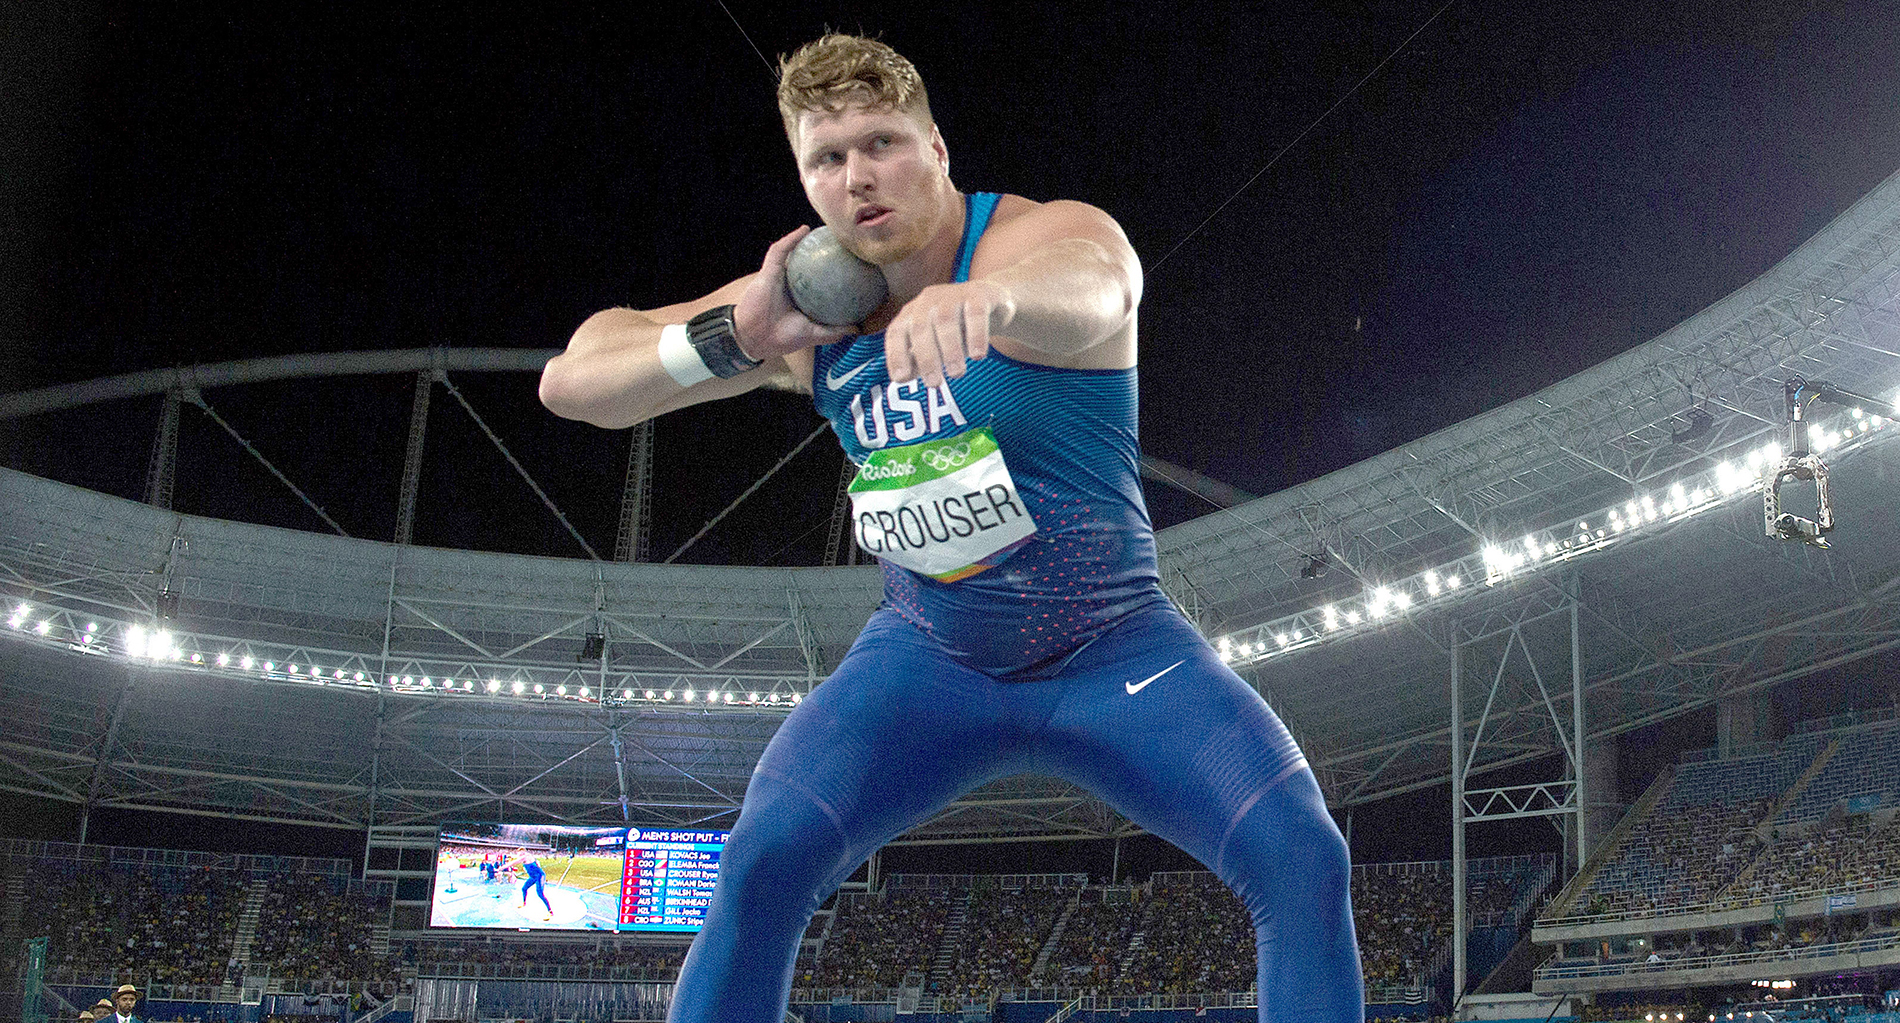 Team USA's Ryan Crouser begins to throw a shot put during a competition.